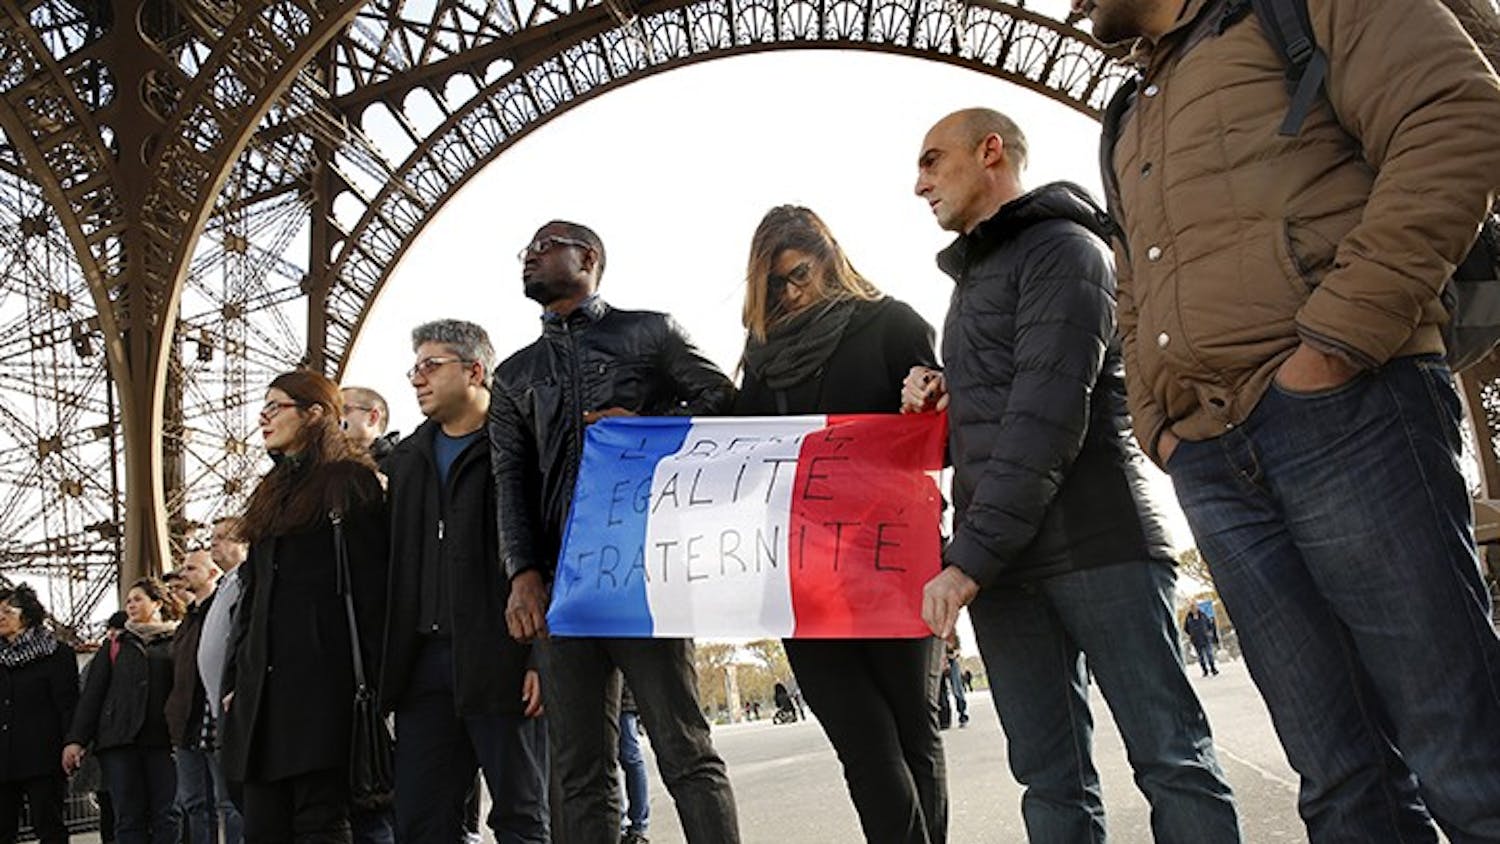 Paris residents take part in a moment of silence under the Eiffel Tower on Monday, Nov.16, in observance of those who died during the terrorist attacks three days ago. Holding a French flag with the words &quot;Liberty, Equality, Brotherhood,&quot; participants stand united during a minute of silence. (Carolyn Cole/Los Angeles Times/TNS)